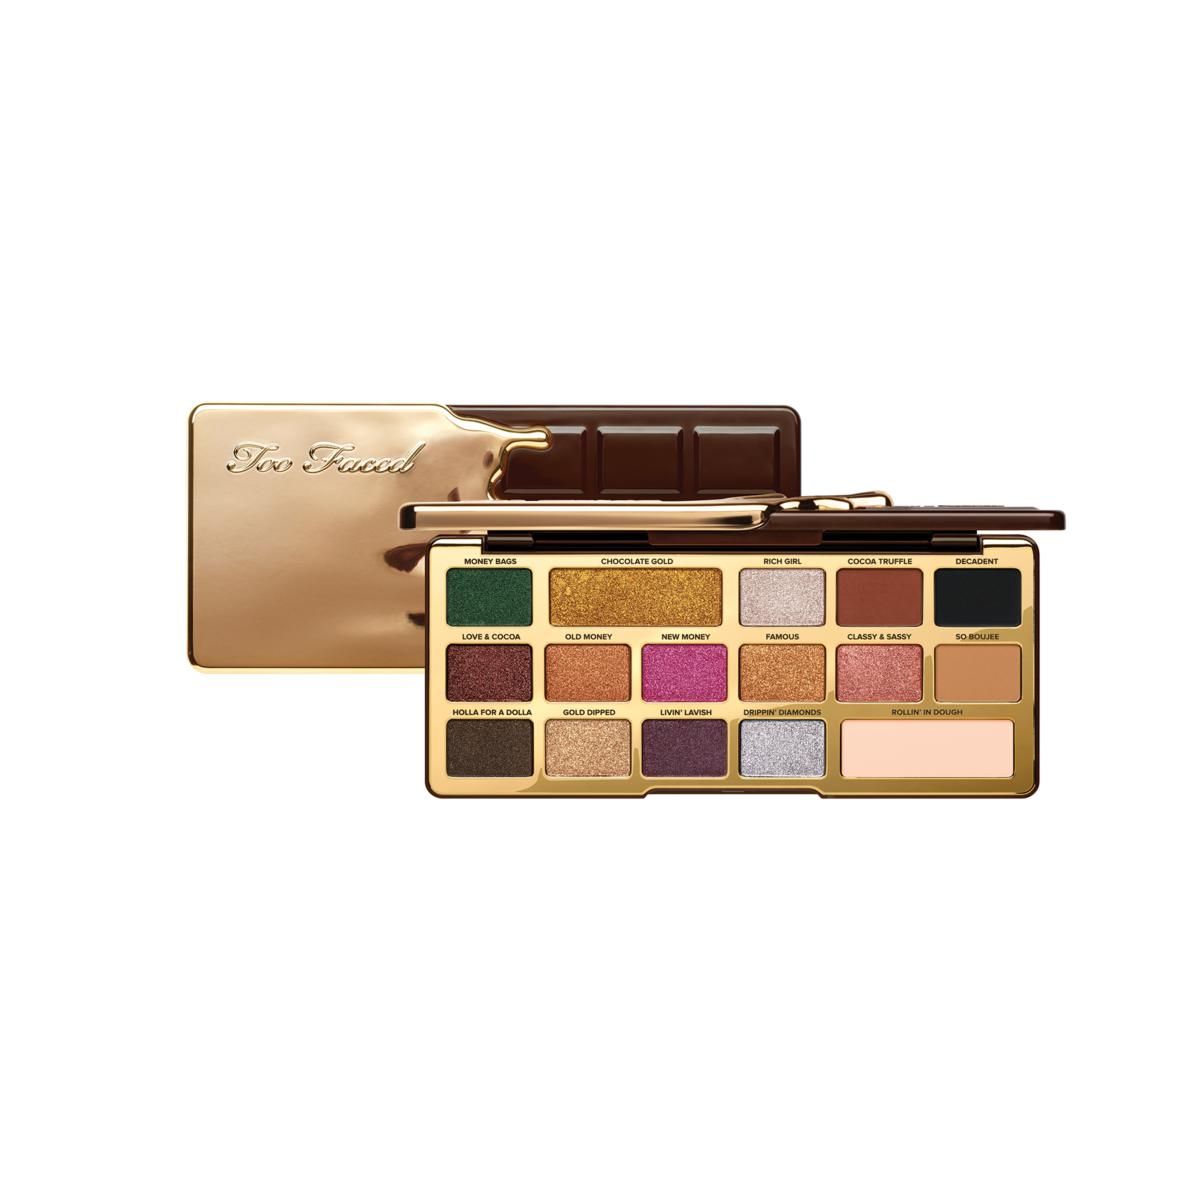 Too Faced Chocolate Gold Eye Shadow Palette - 9719953 | HSN | HSN